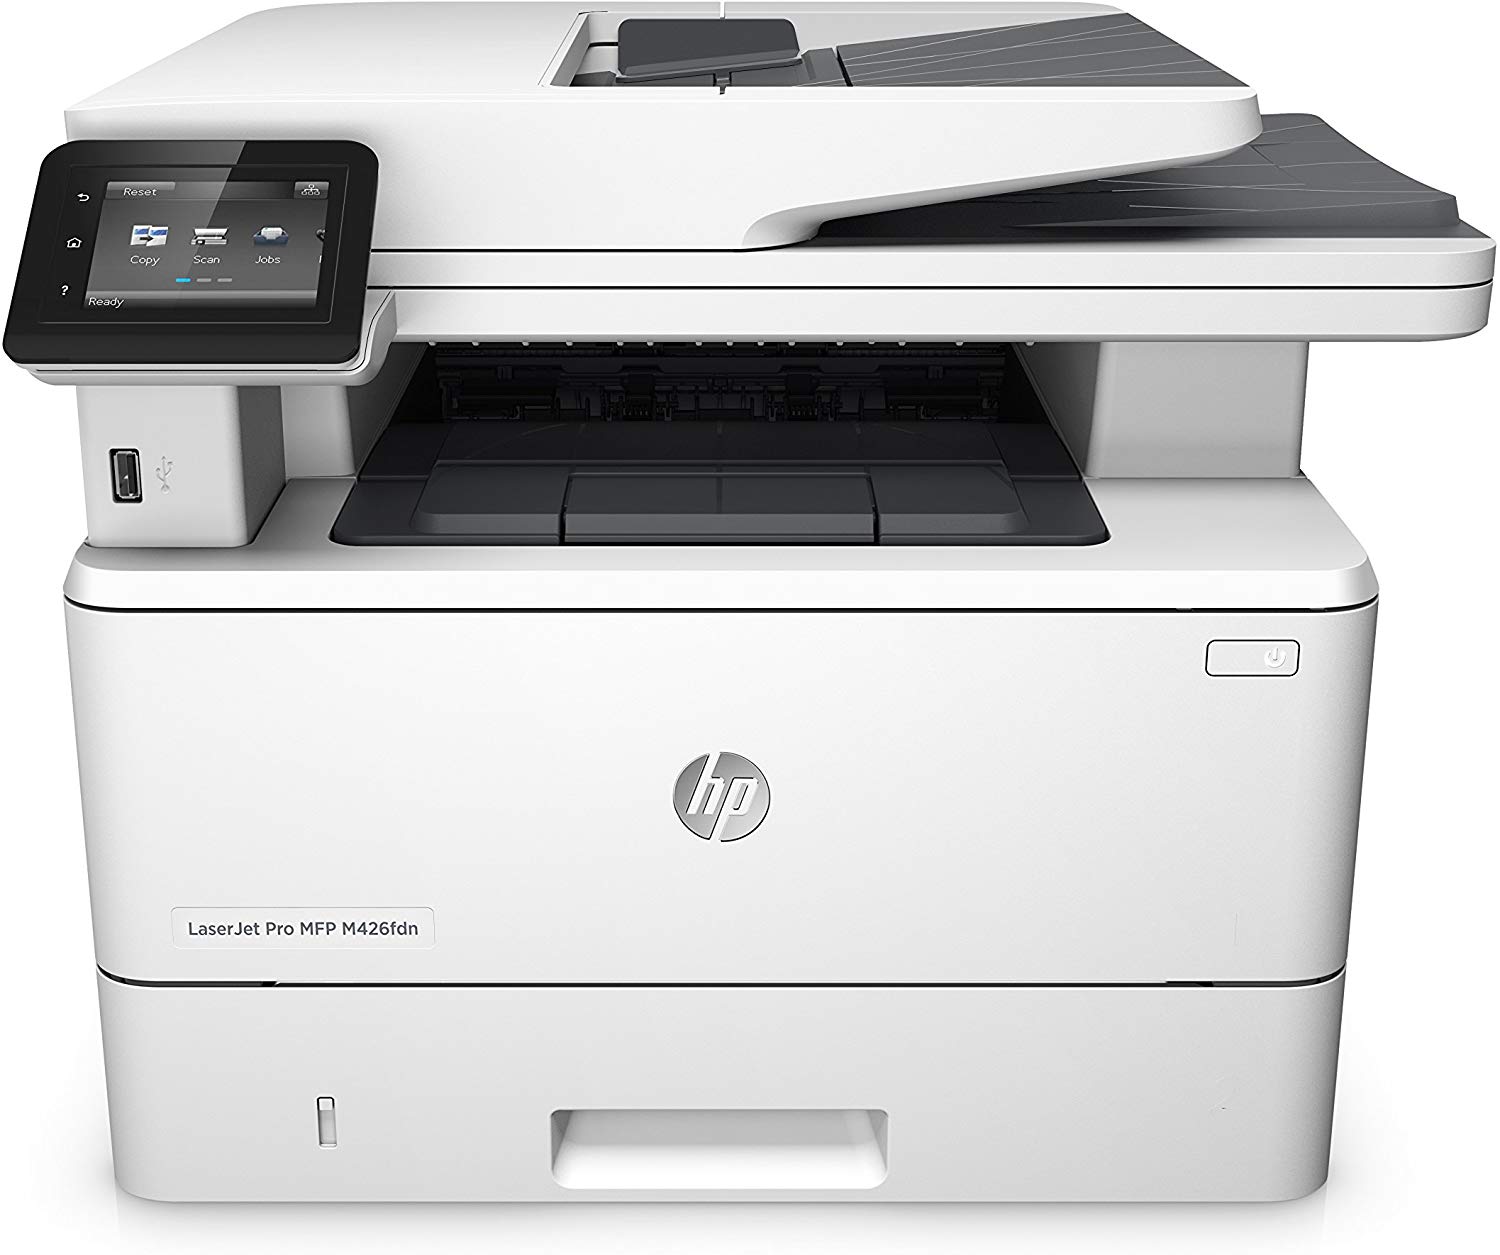 Buy Hp Laserjet Pro Mfp M428dw Printer Essencial in carrying out all type of Scaning get yours now at machito Gadgets and enjoy..